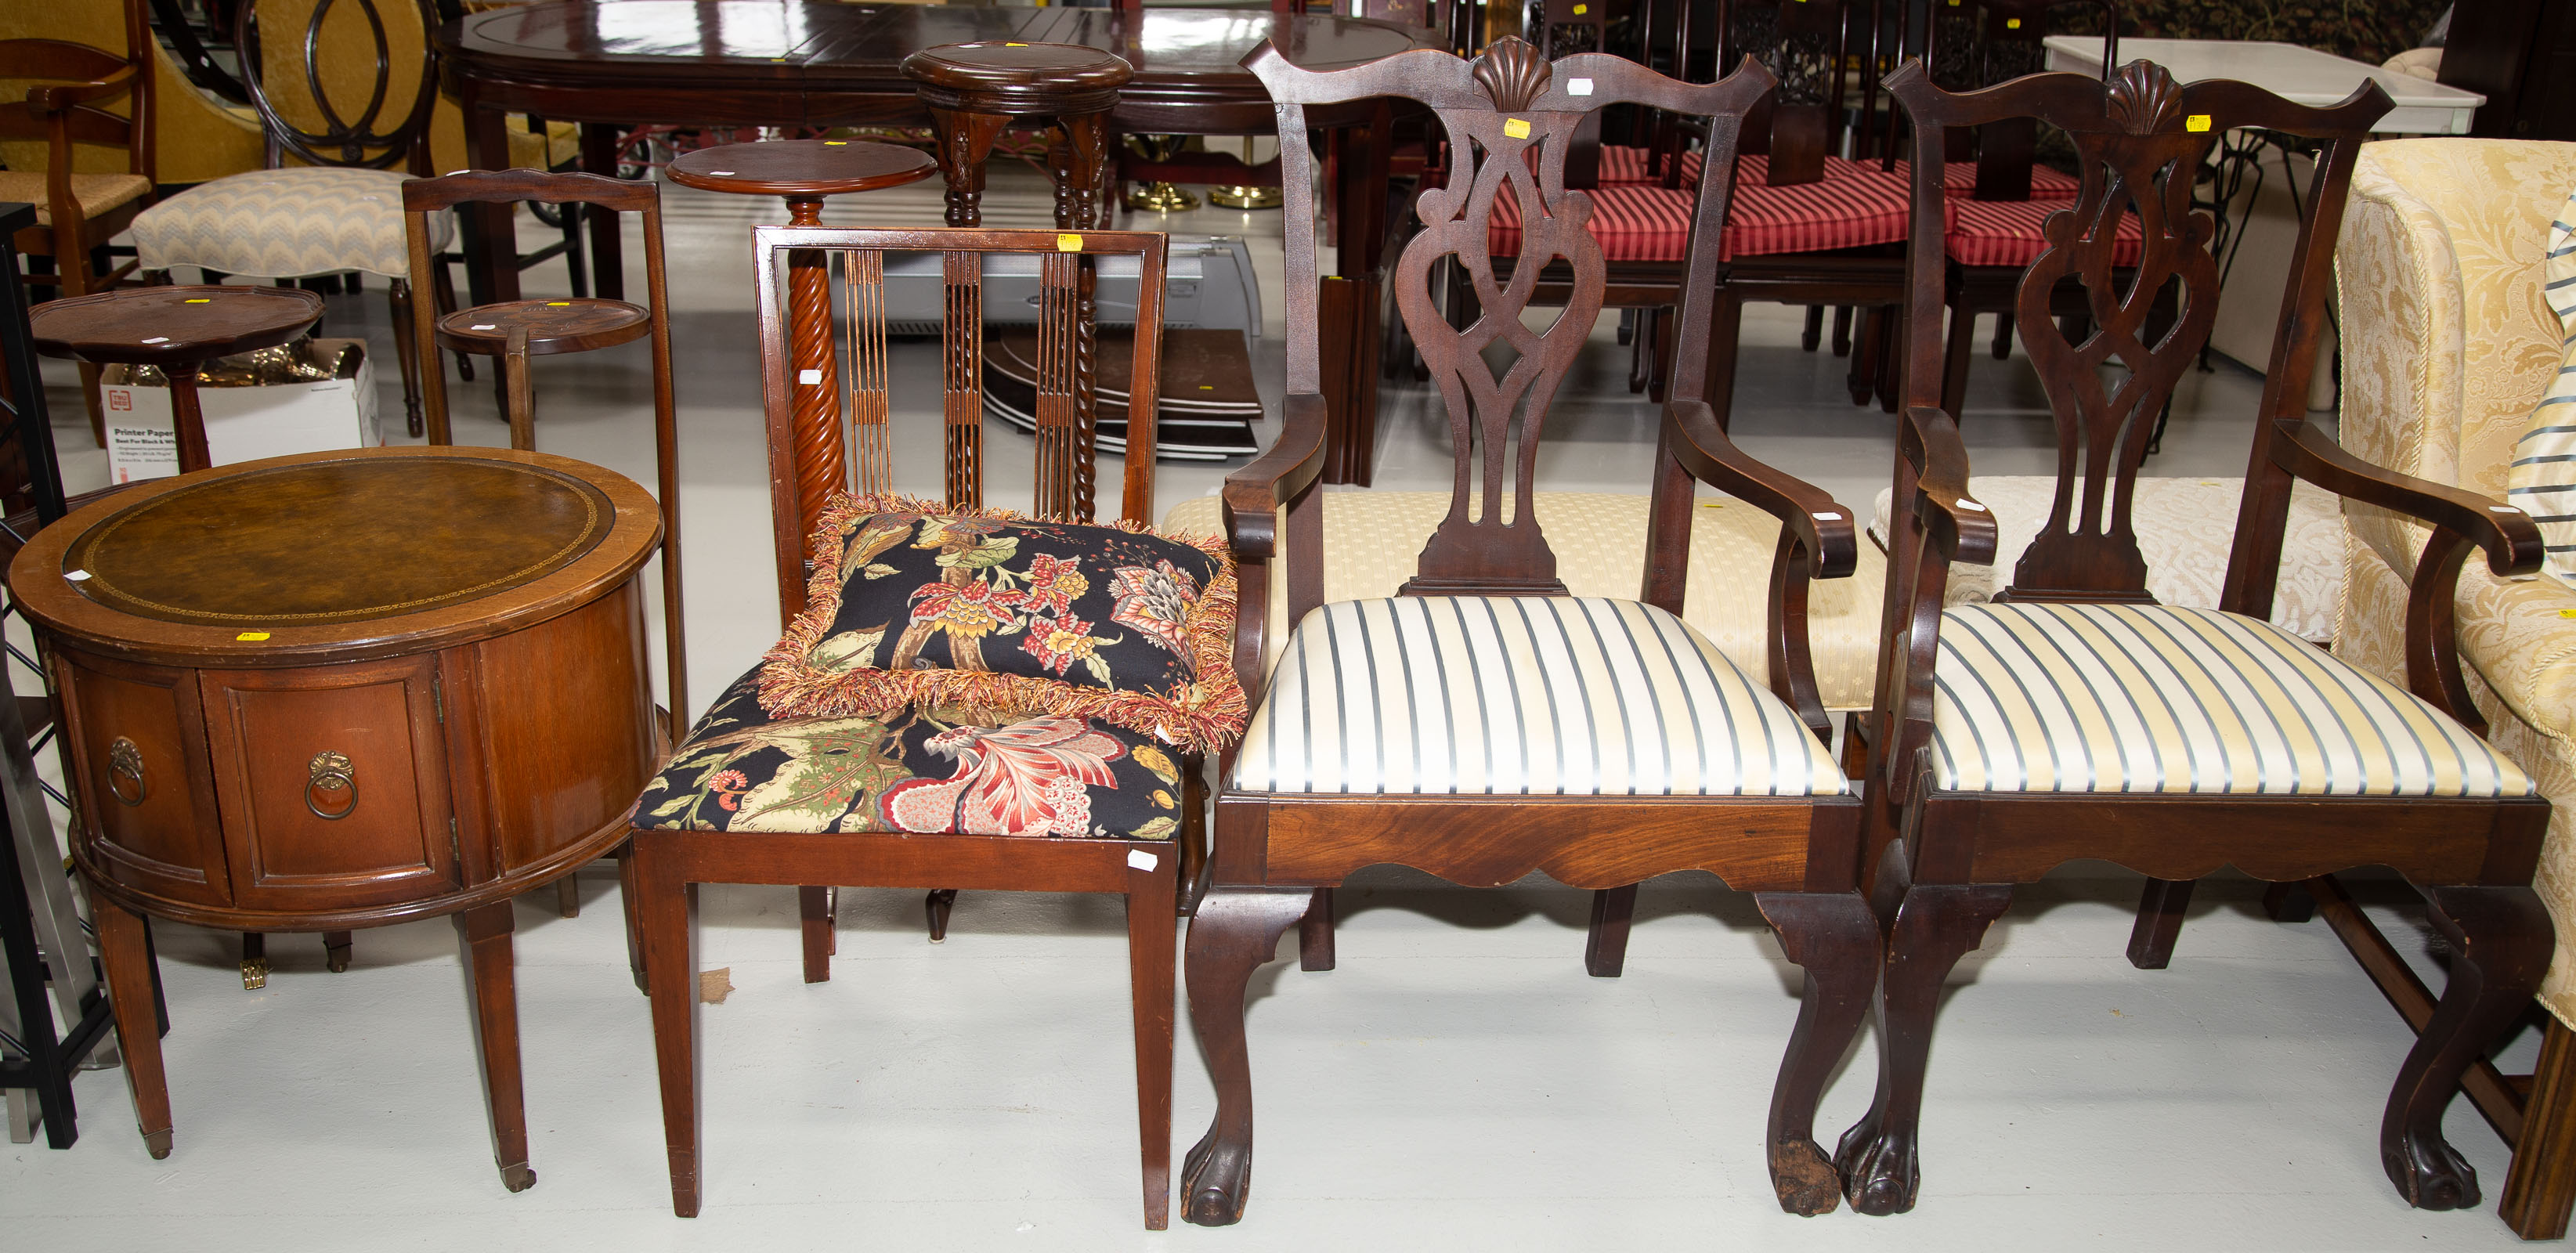 FOUR PIECES OF MAHOGANY FURNITURE 337736